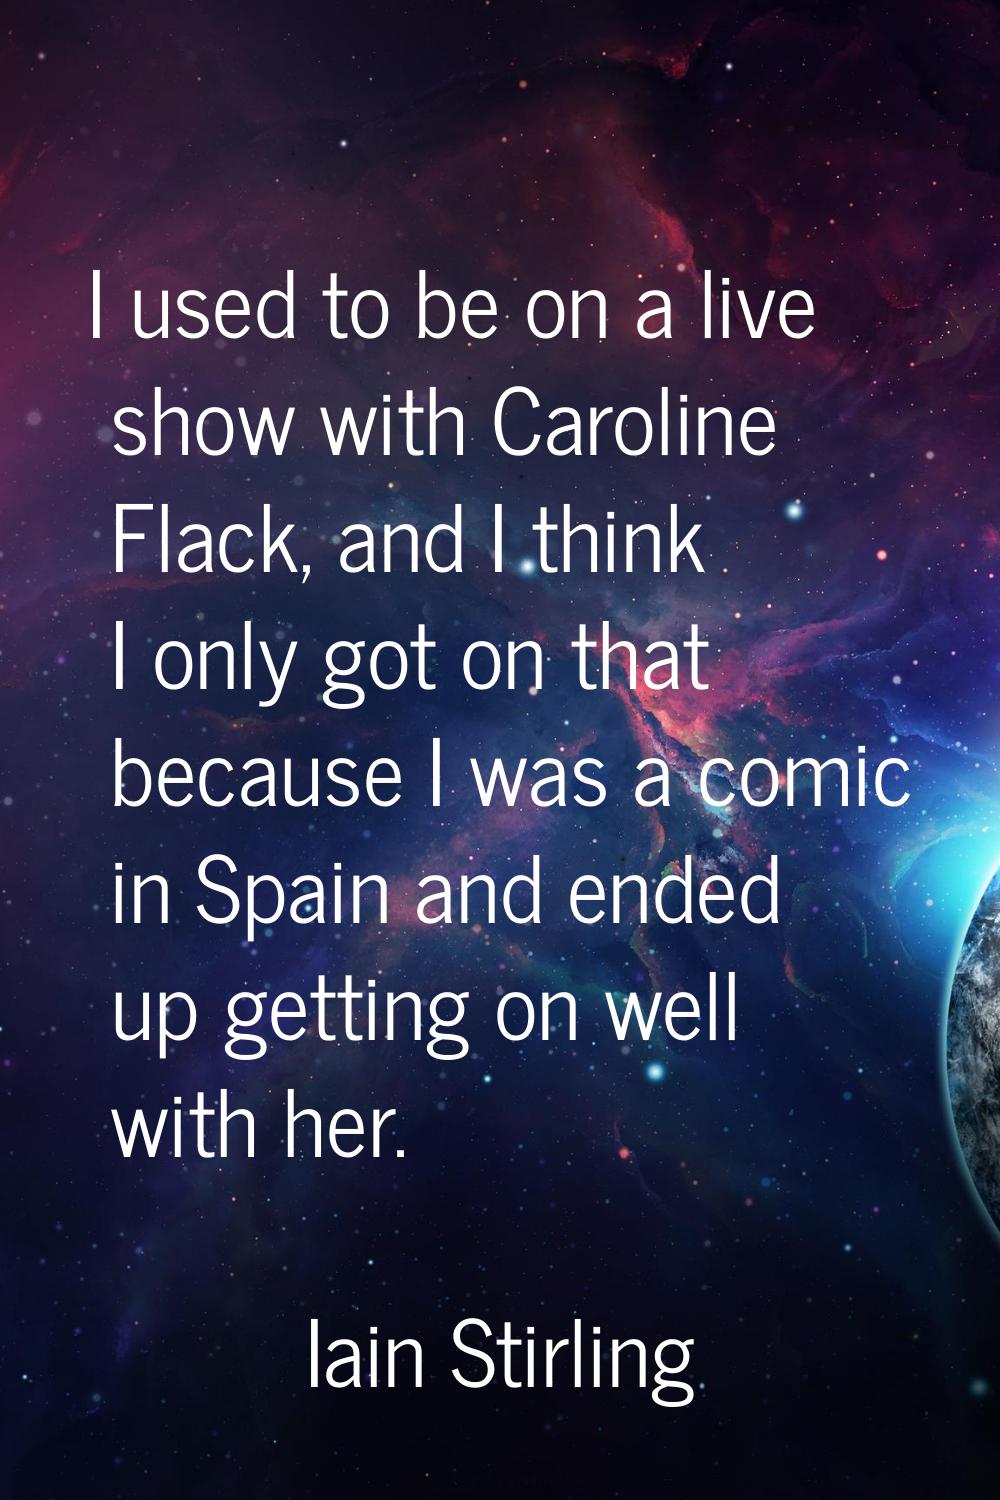 I used to be on a live show with Caroline Flack, and I think I only got on that because I was a com